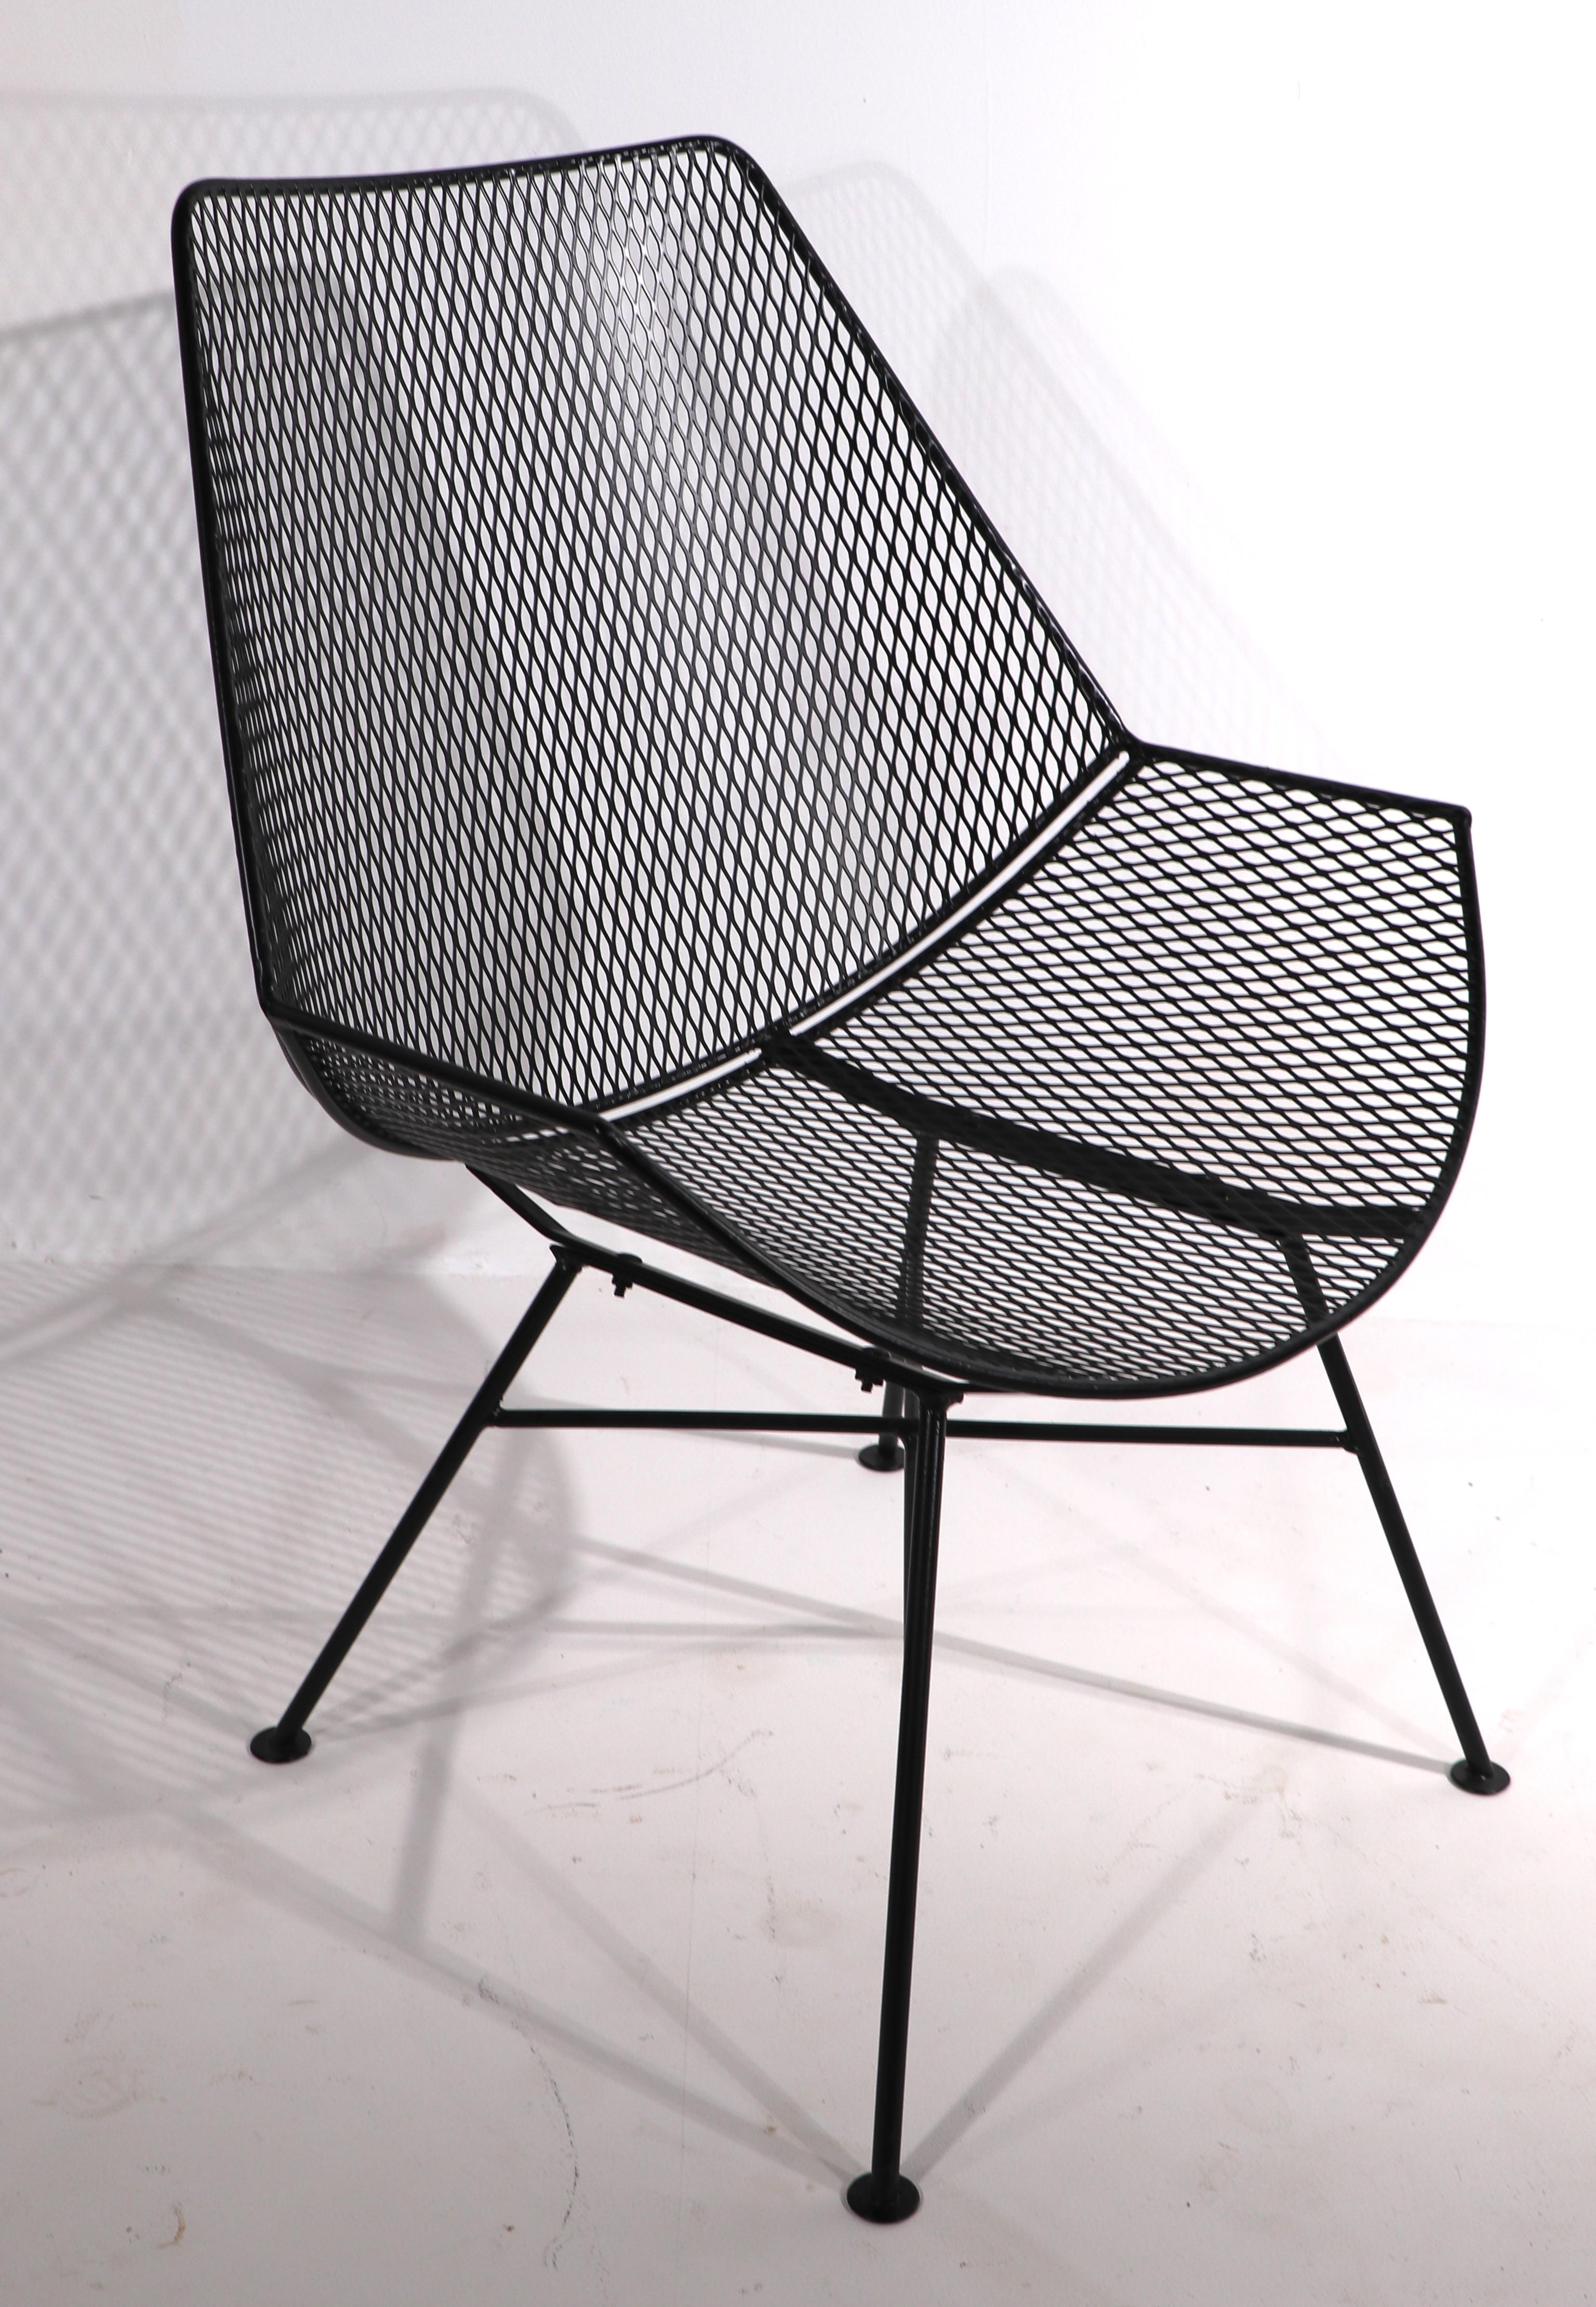 Rare set of stylish wrought iron and metal mesh lounge chairs design attributed to Tempestini, for Salterini. The chairs are newly powder coated with a black satin finish, making the architectural form even more graphic and impressive.
Wrought iron